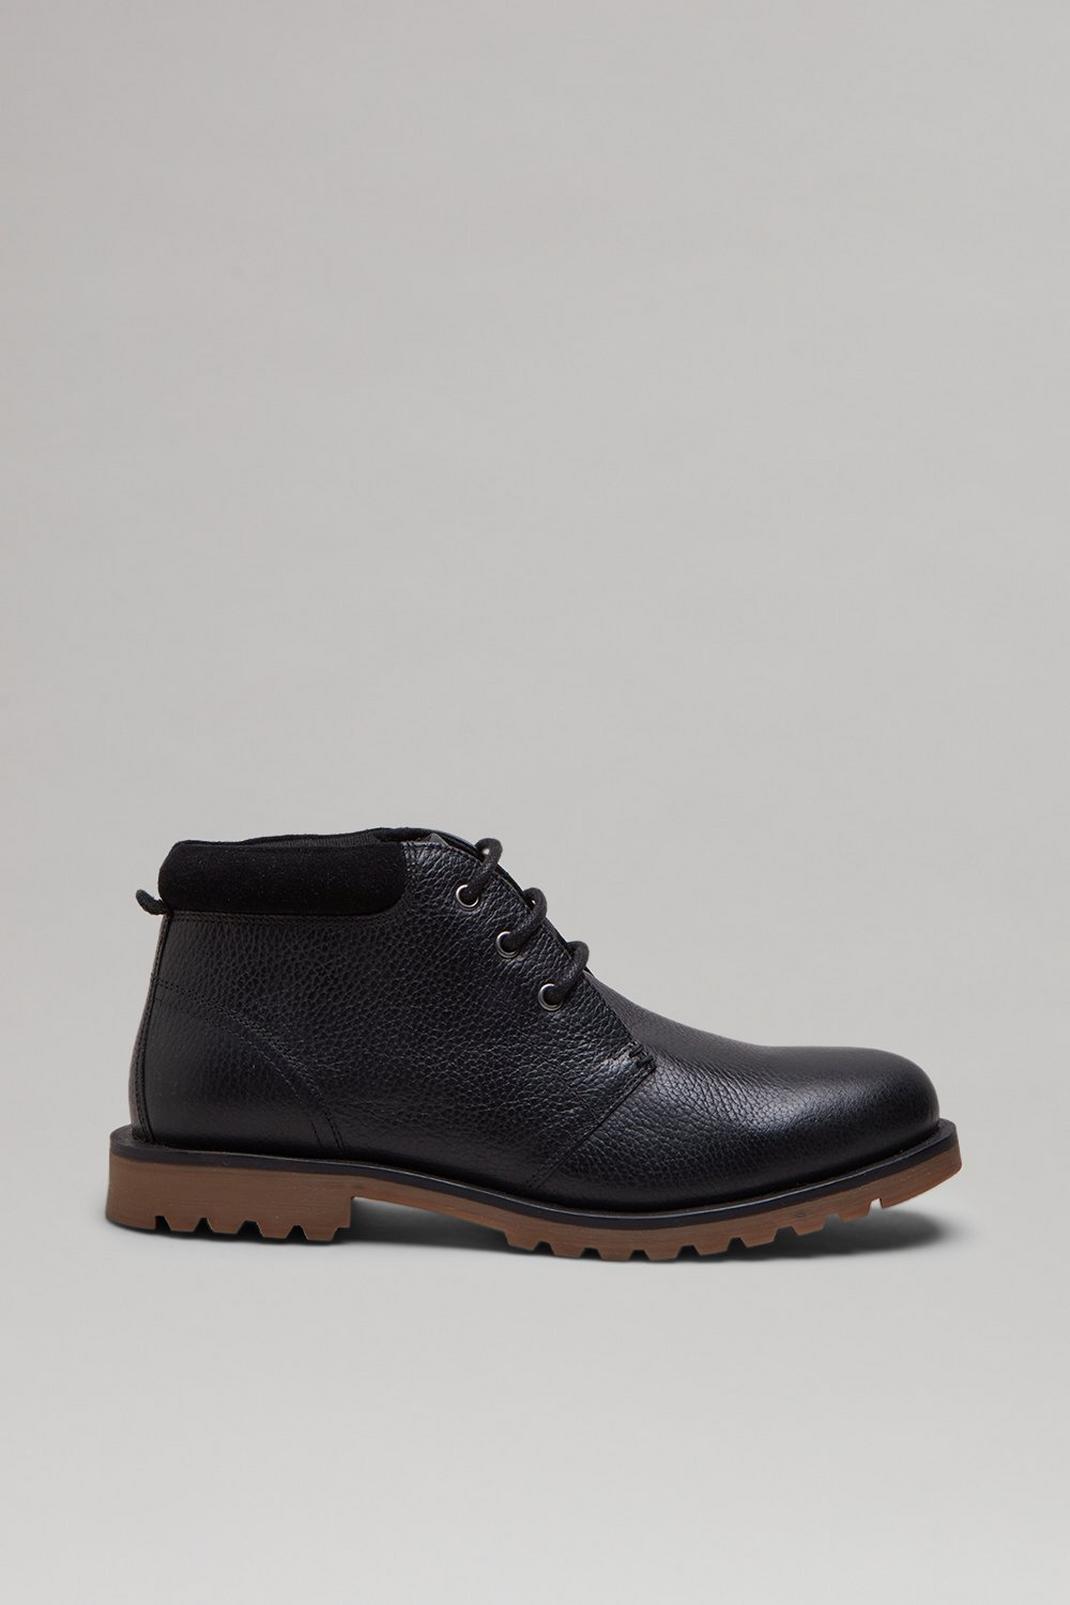 Black Padded Leather Chukka Boots image number 1